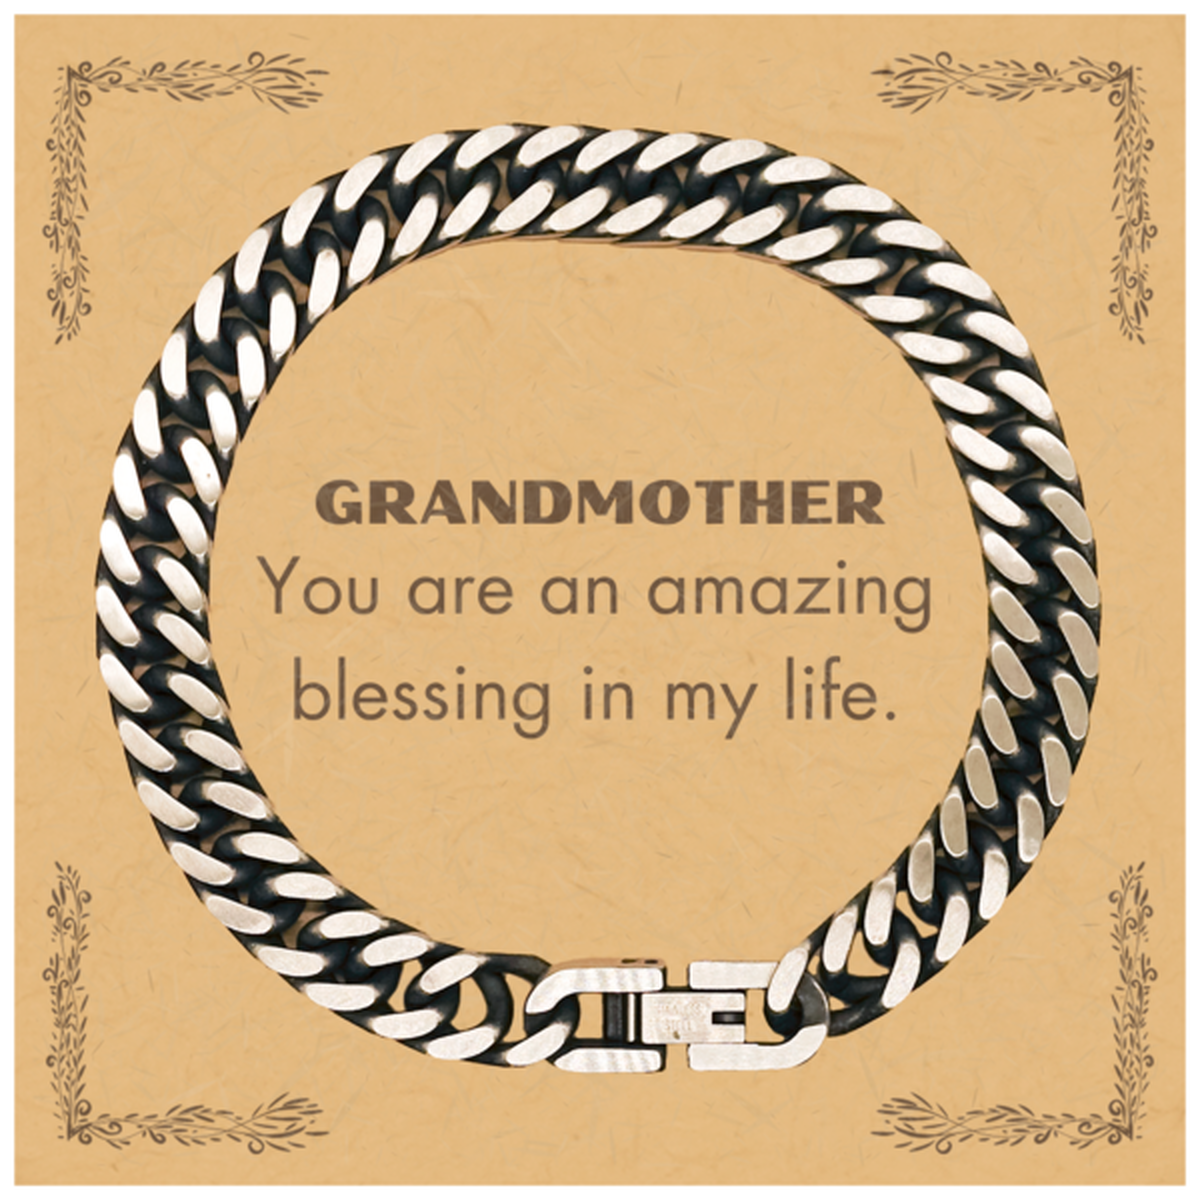 Grandmother Cuban Link Chain Bracelet, You are an amazing blessing in my life, Thank You Gifts For Grandmother, Inspirational Birthday Christmas Unique Gifts For Grandmother